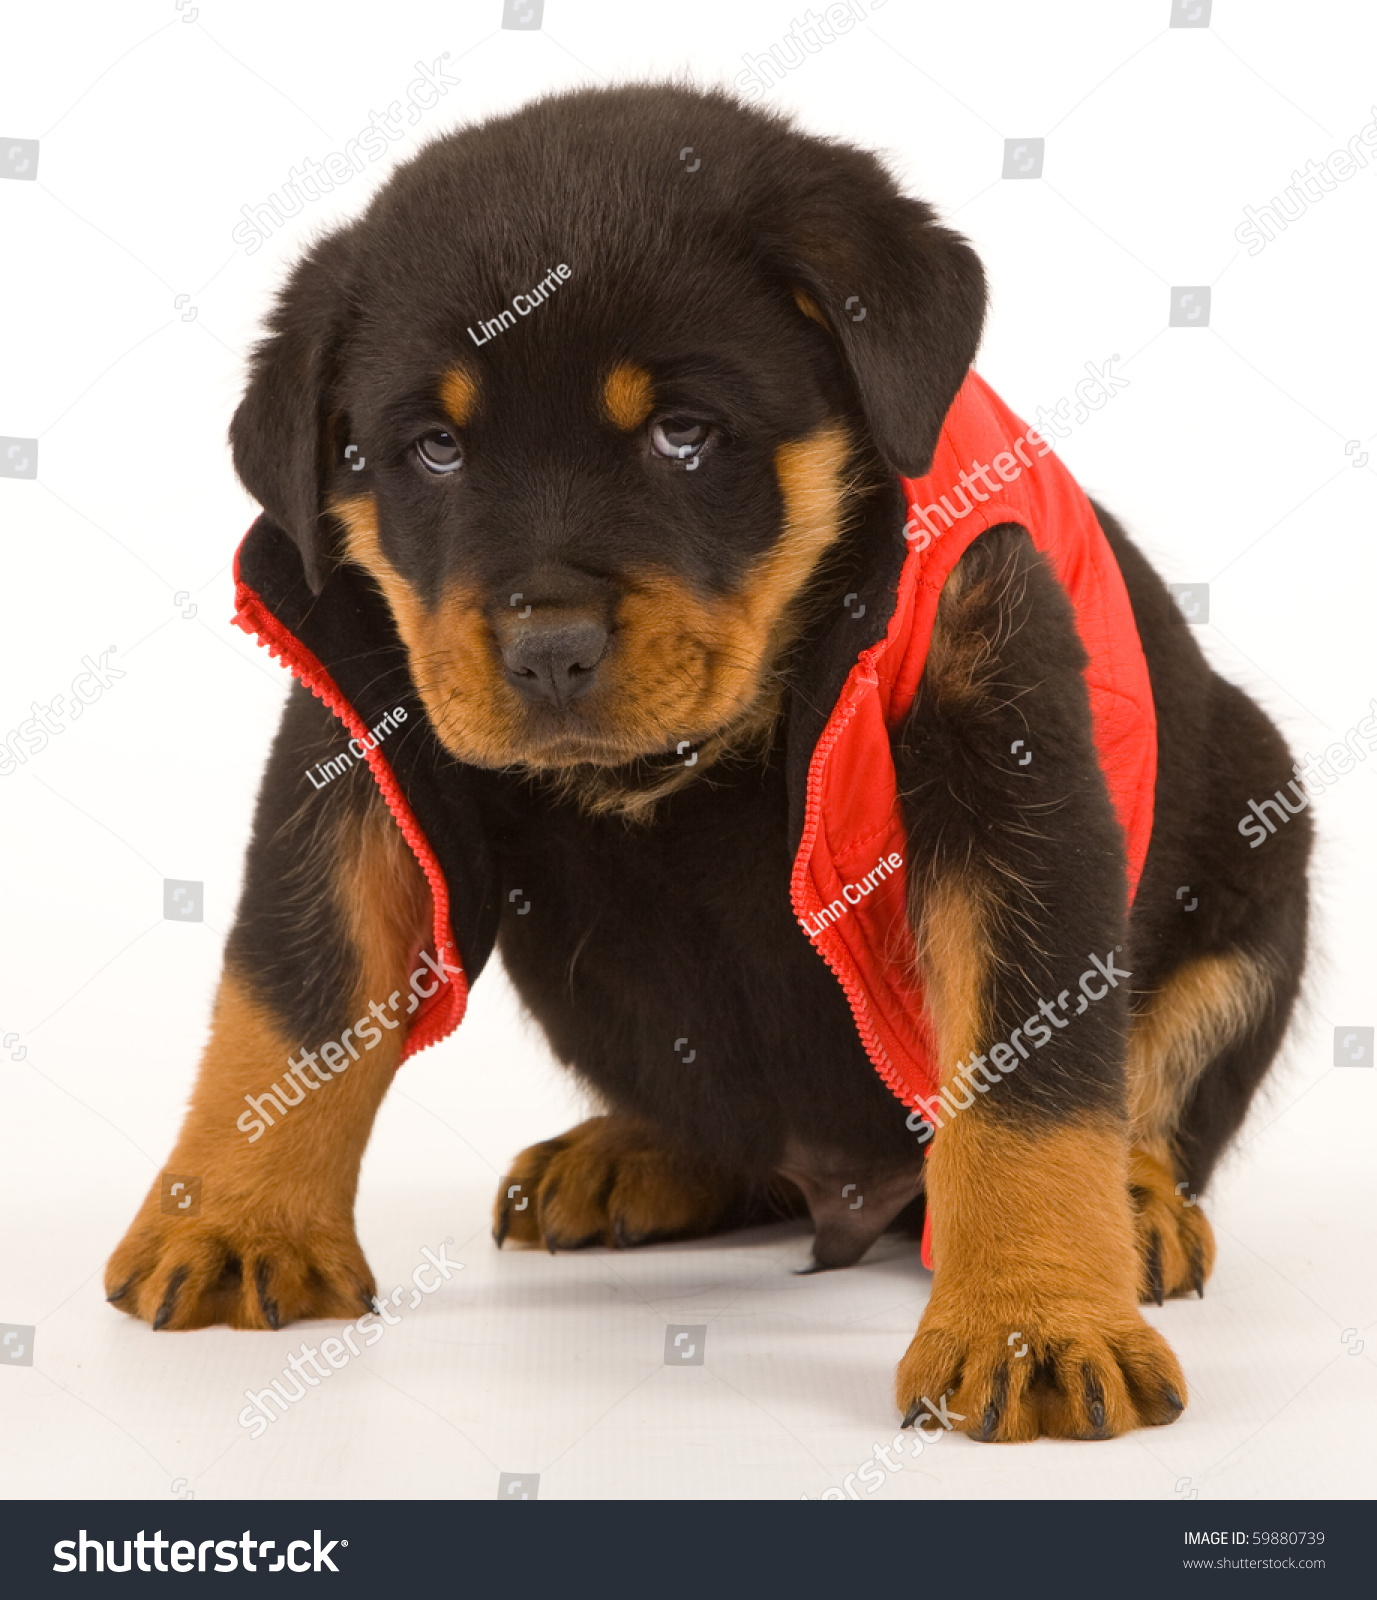 Cute Rottweiler Puppy Sitting On White Stock Photo Edit Now 59880739